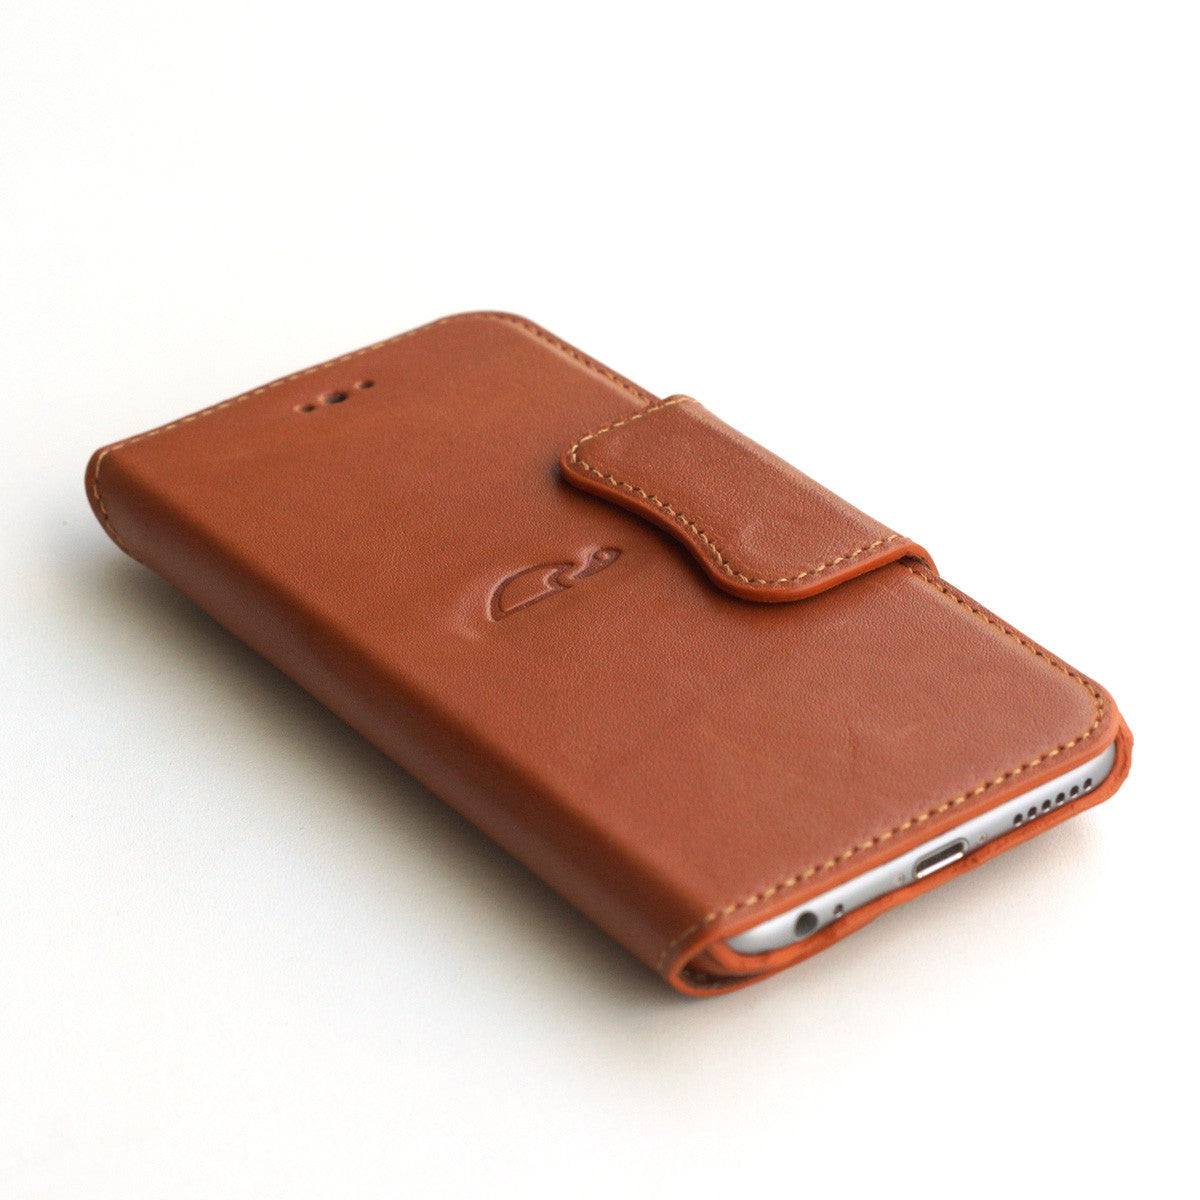 The  iPhone Case with the "Secret Pocket"